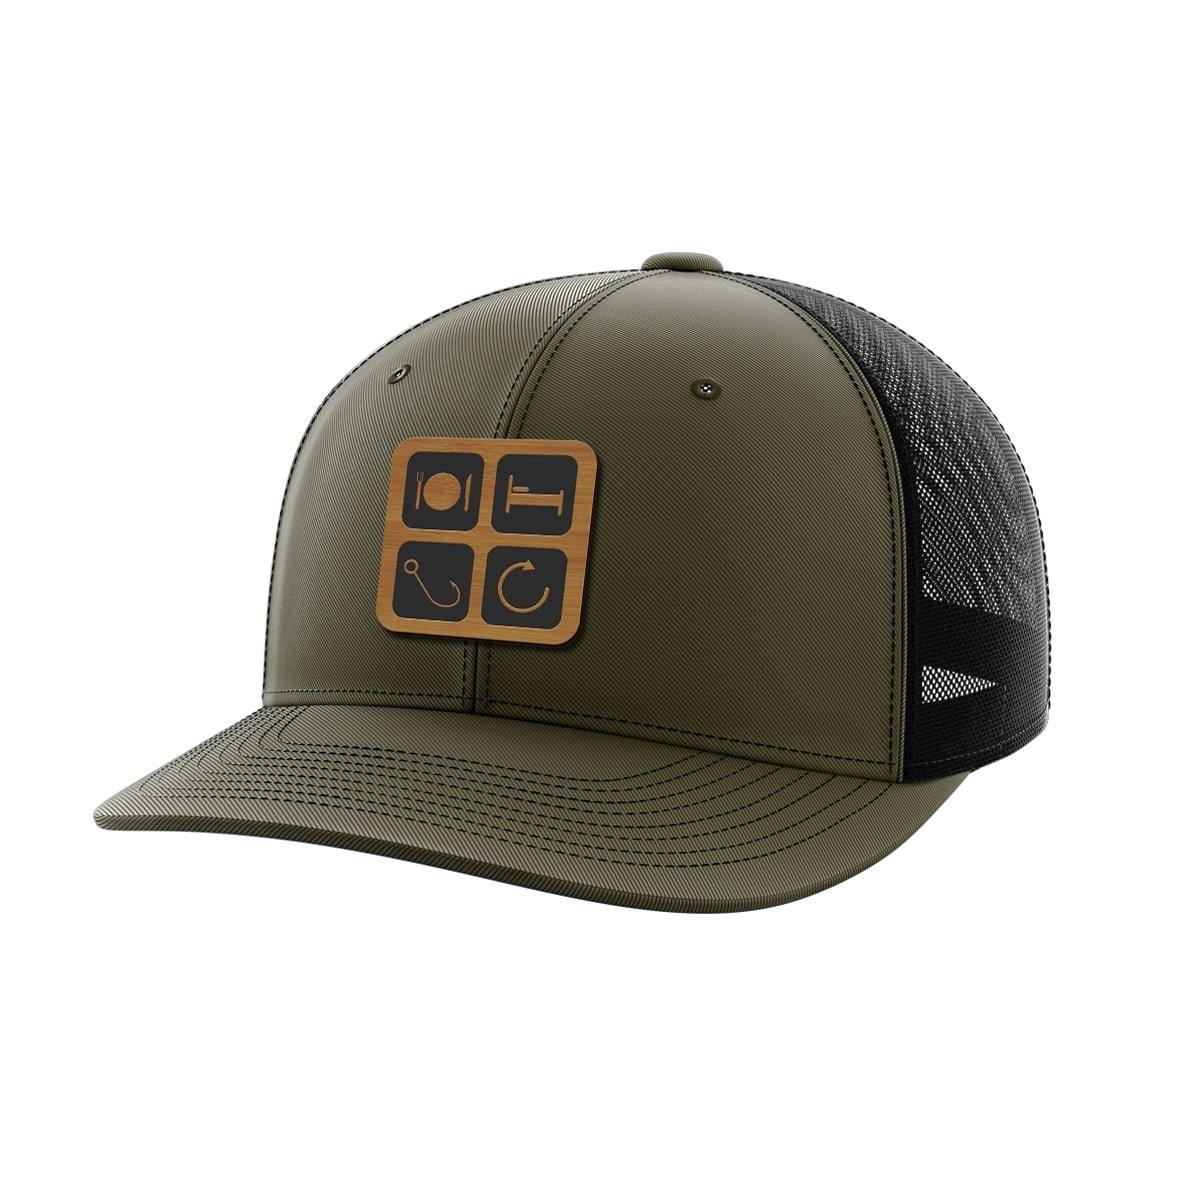 Eat Sleep Fish Repeat Bamboo Patch Hat - Greater Half